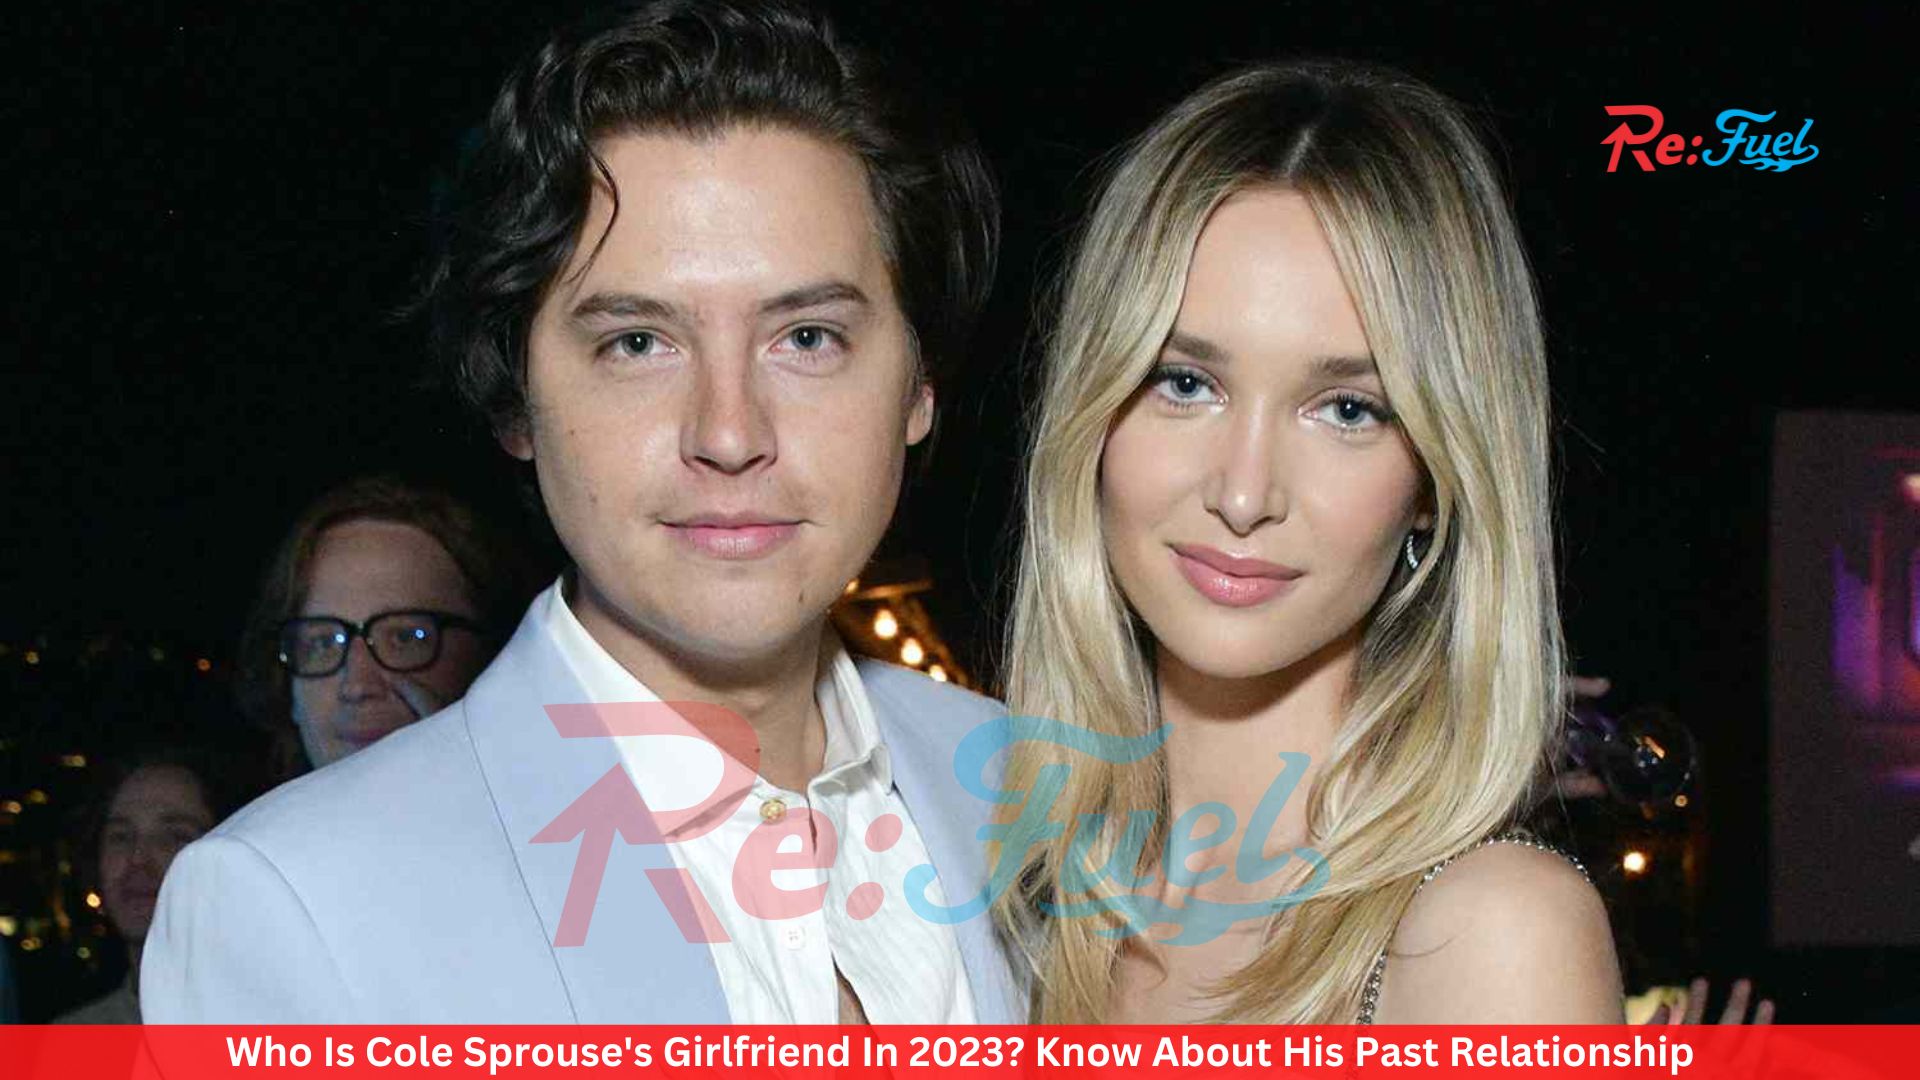 Who Is Cole Sprouse's Girlfriend In 2023? Know About His Past Relationship